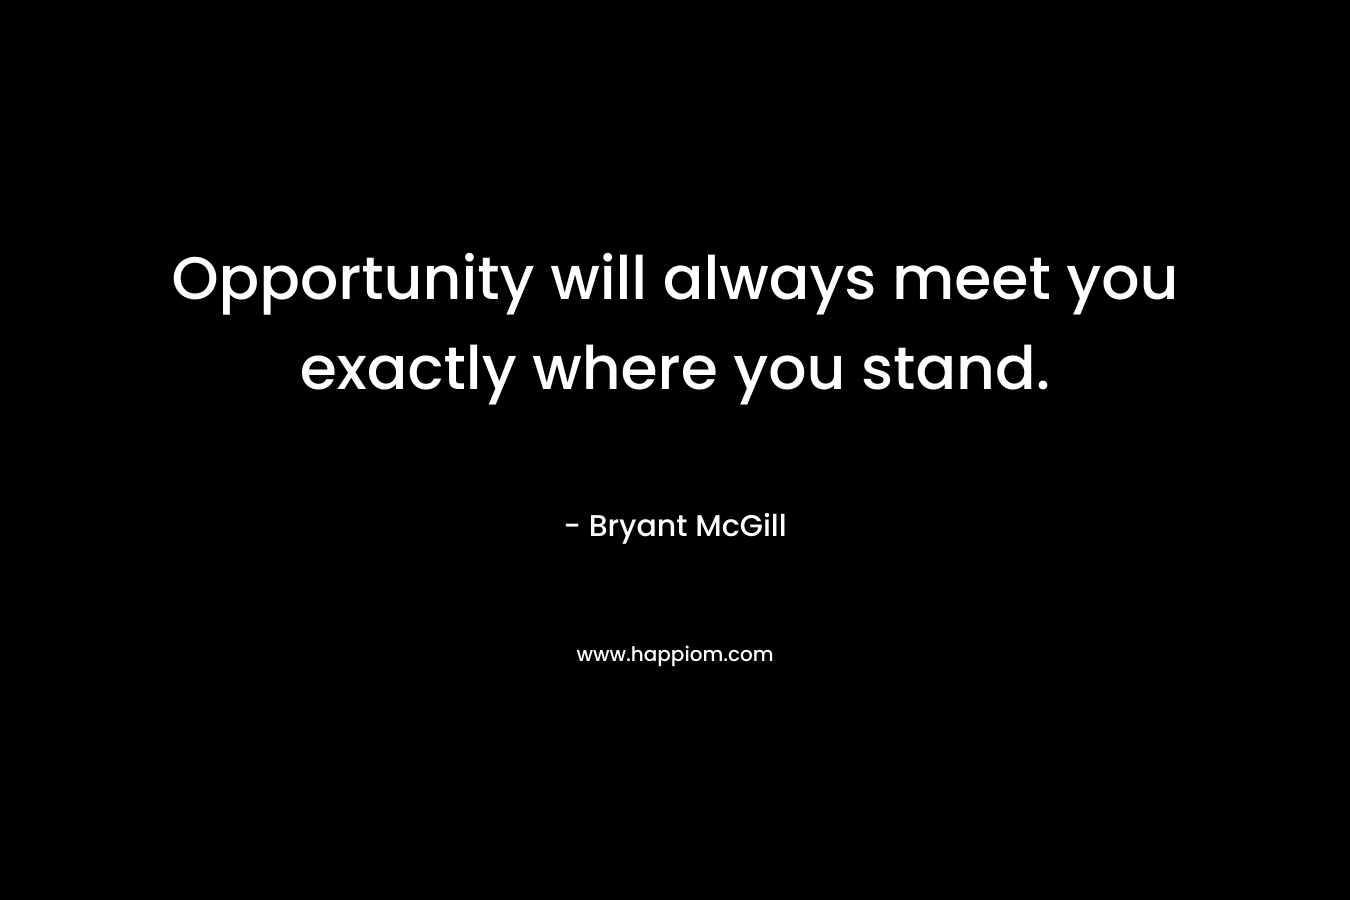 Opportunity will always meet you exactly where you stand.